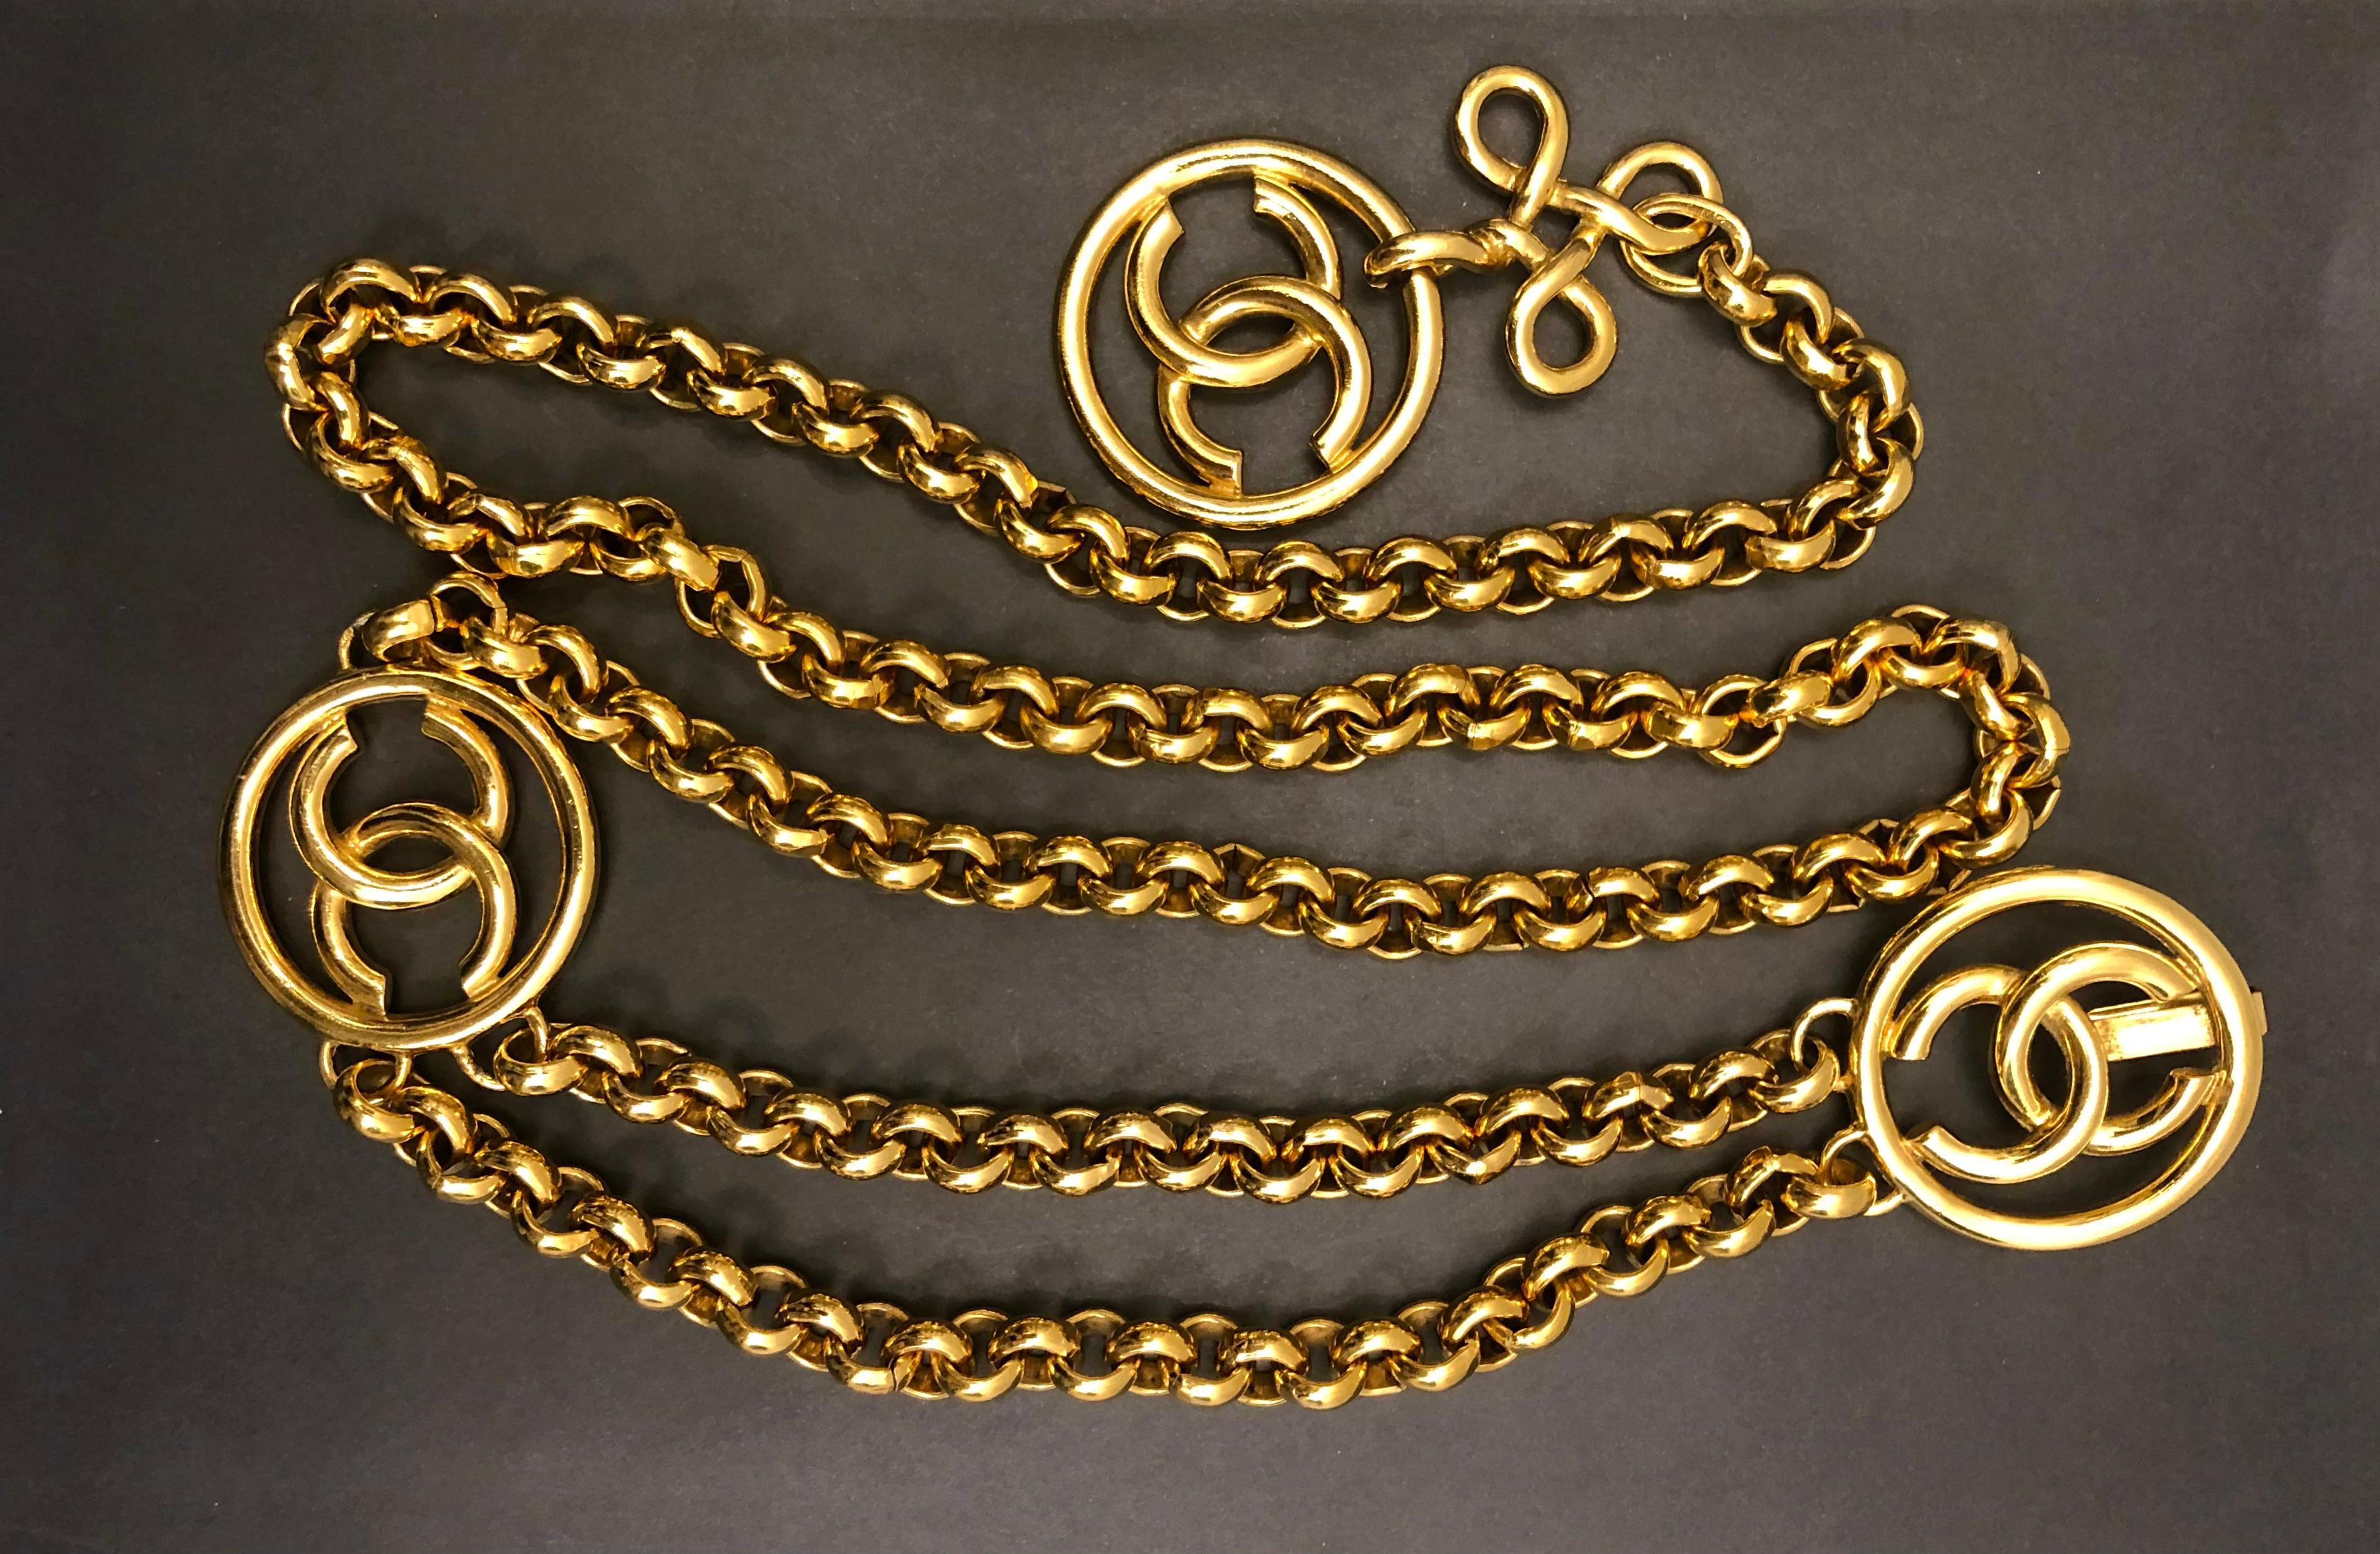 This vintage CHANEL chain belt is crafted of sturdy gold toned chains featuring a massive CC clover charm. Adjustable hook fastening. Chain measures approximately 40 inches (101.6 cm) Wearable length up to 37 inches (94 cm) Clover charm 3 inches